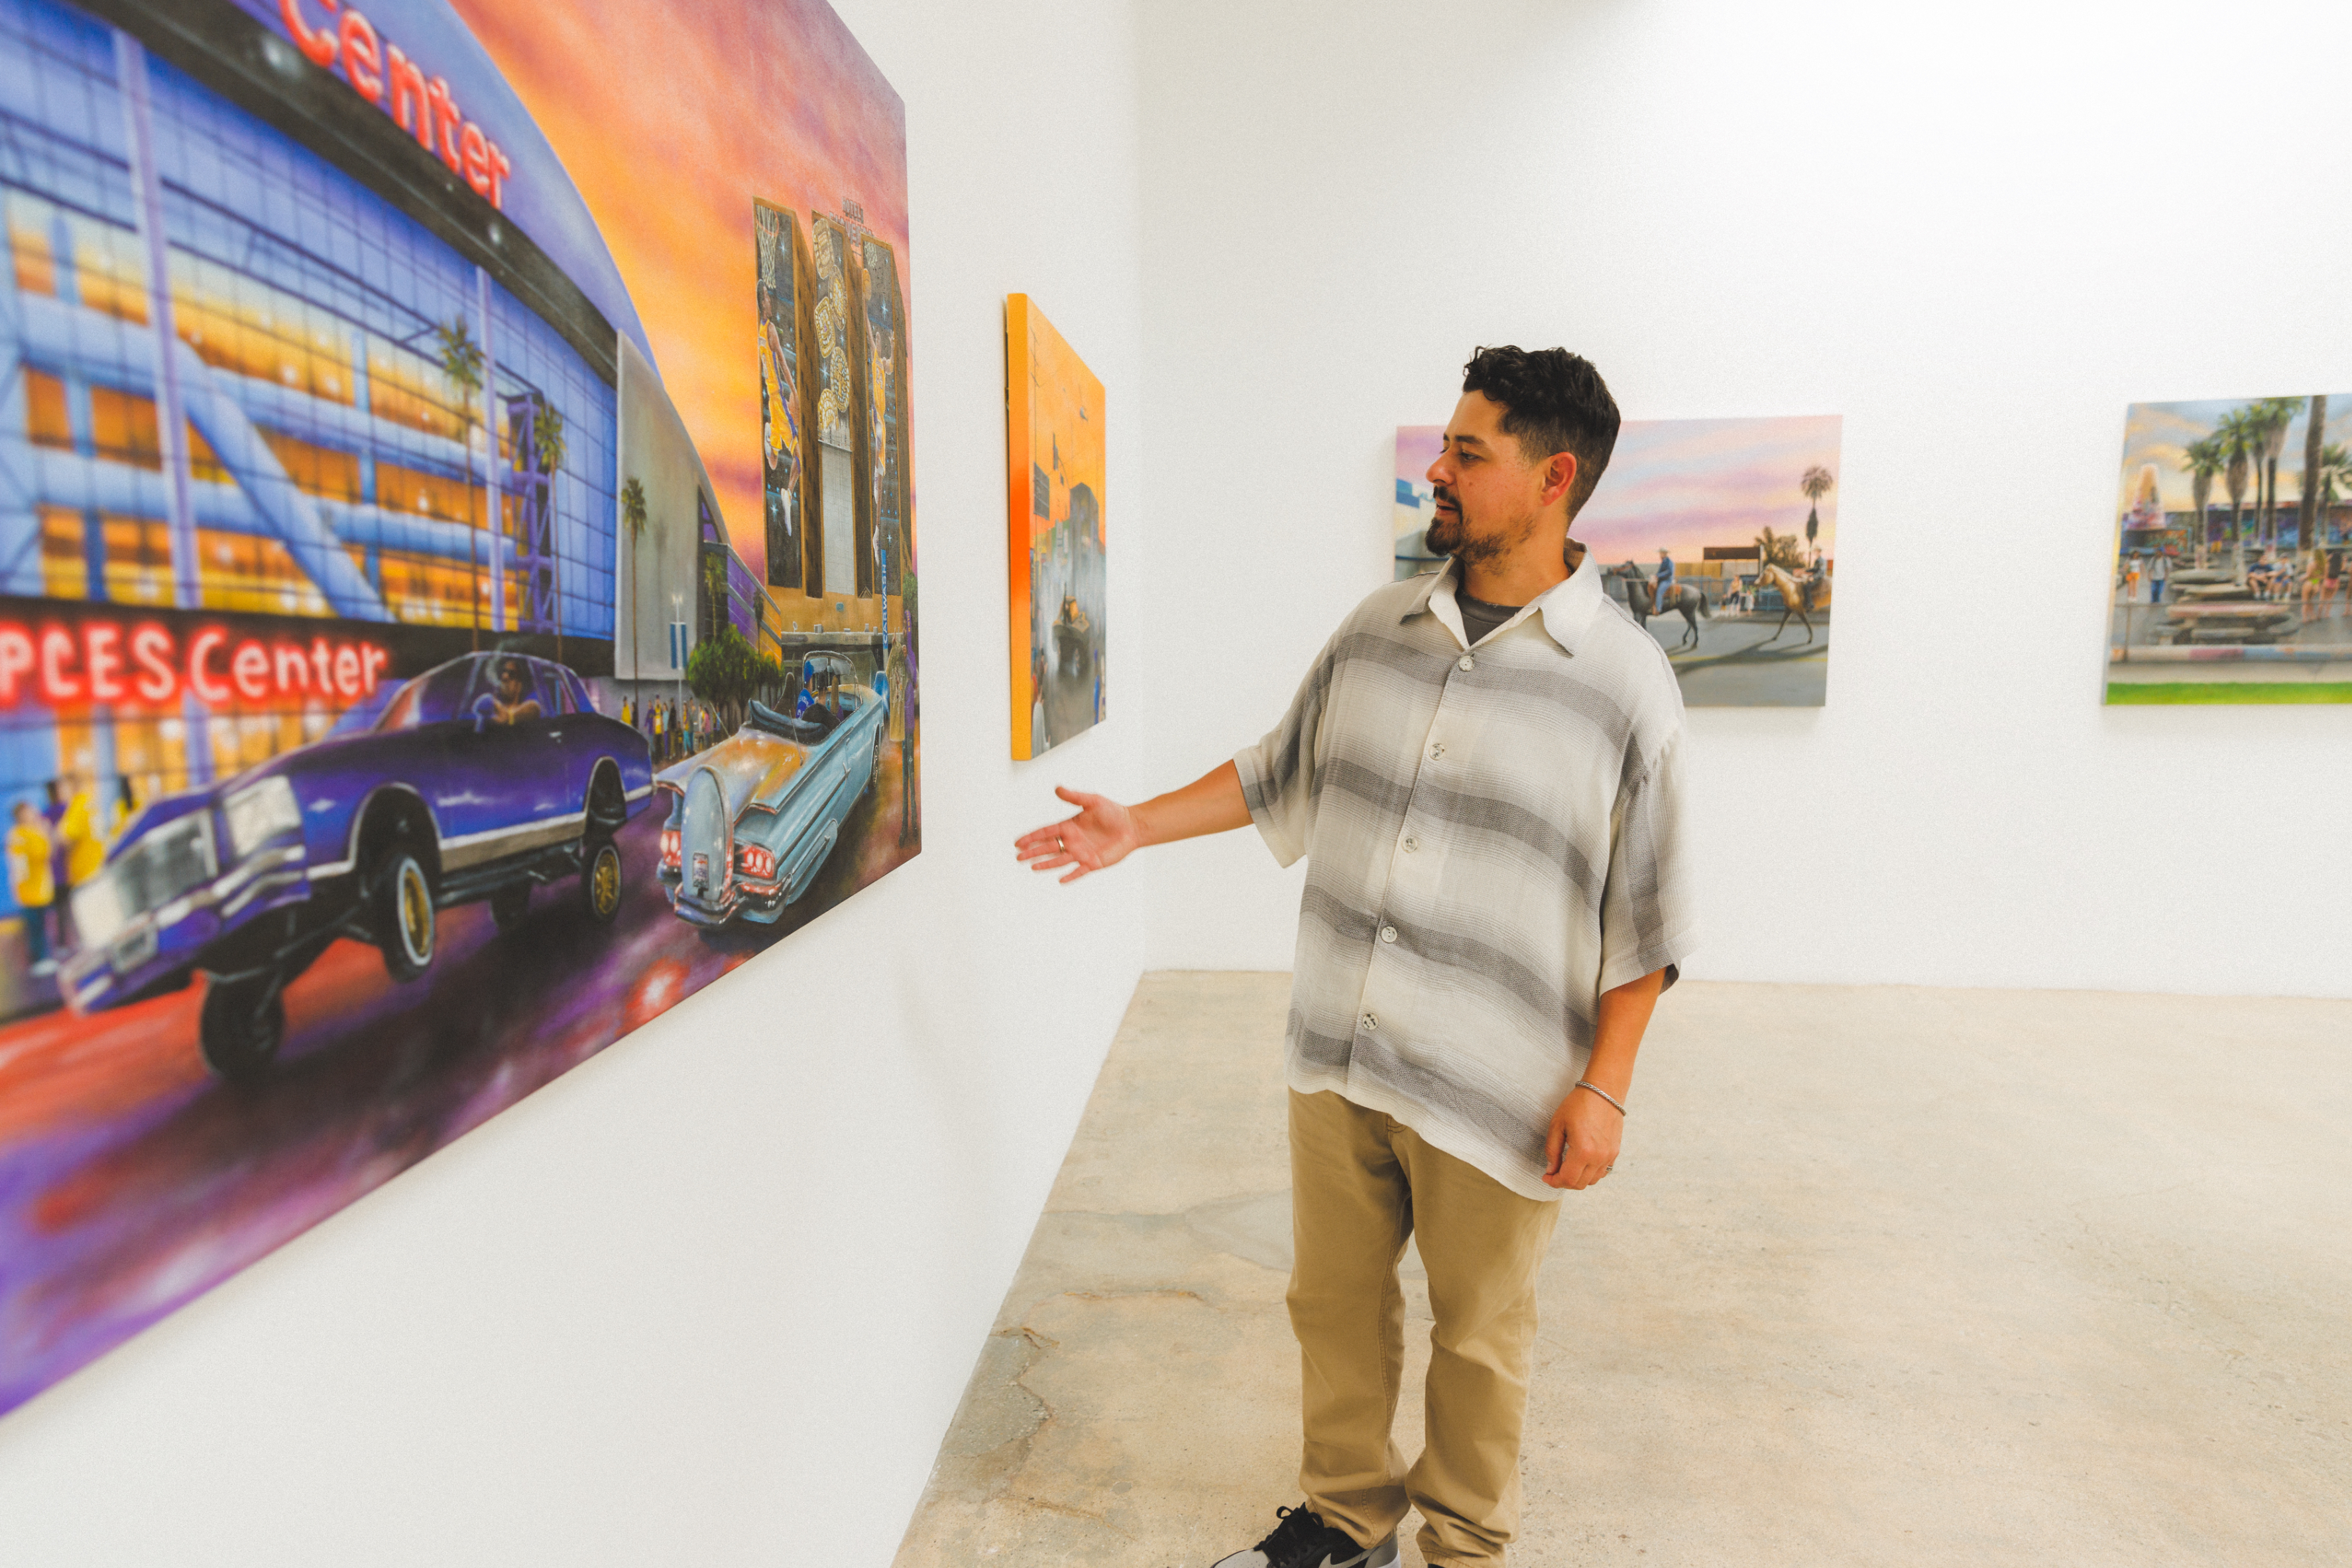 Man in a plaid shirt at an art gallery points at a painting, wearing casual sneakers